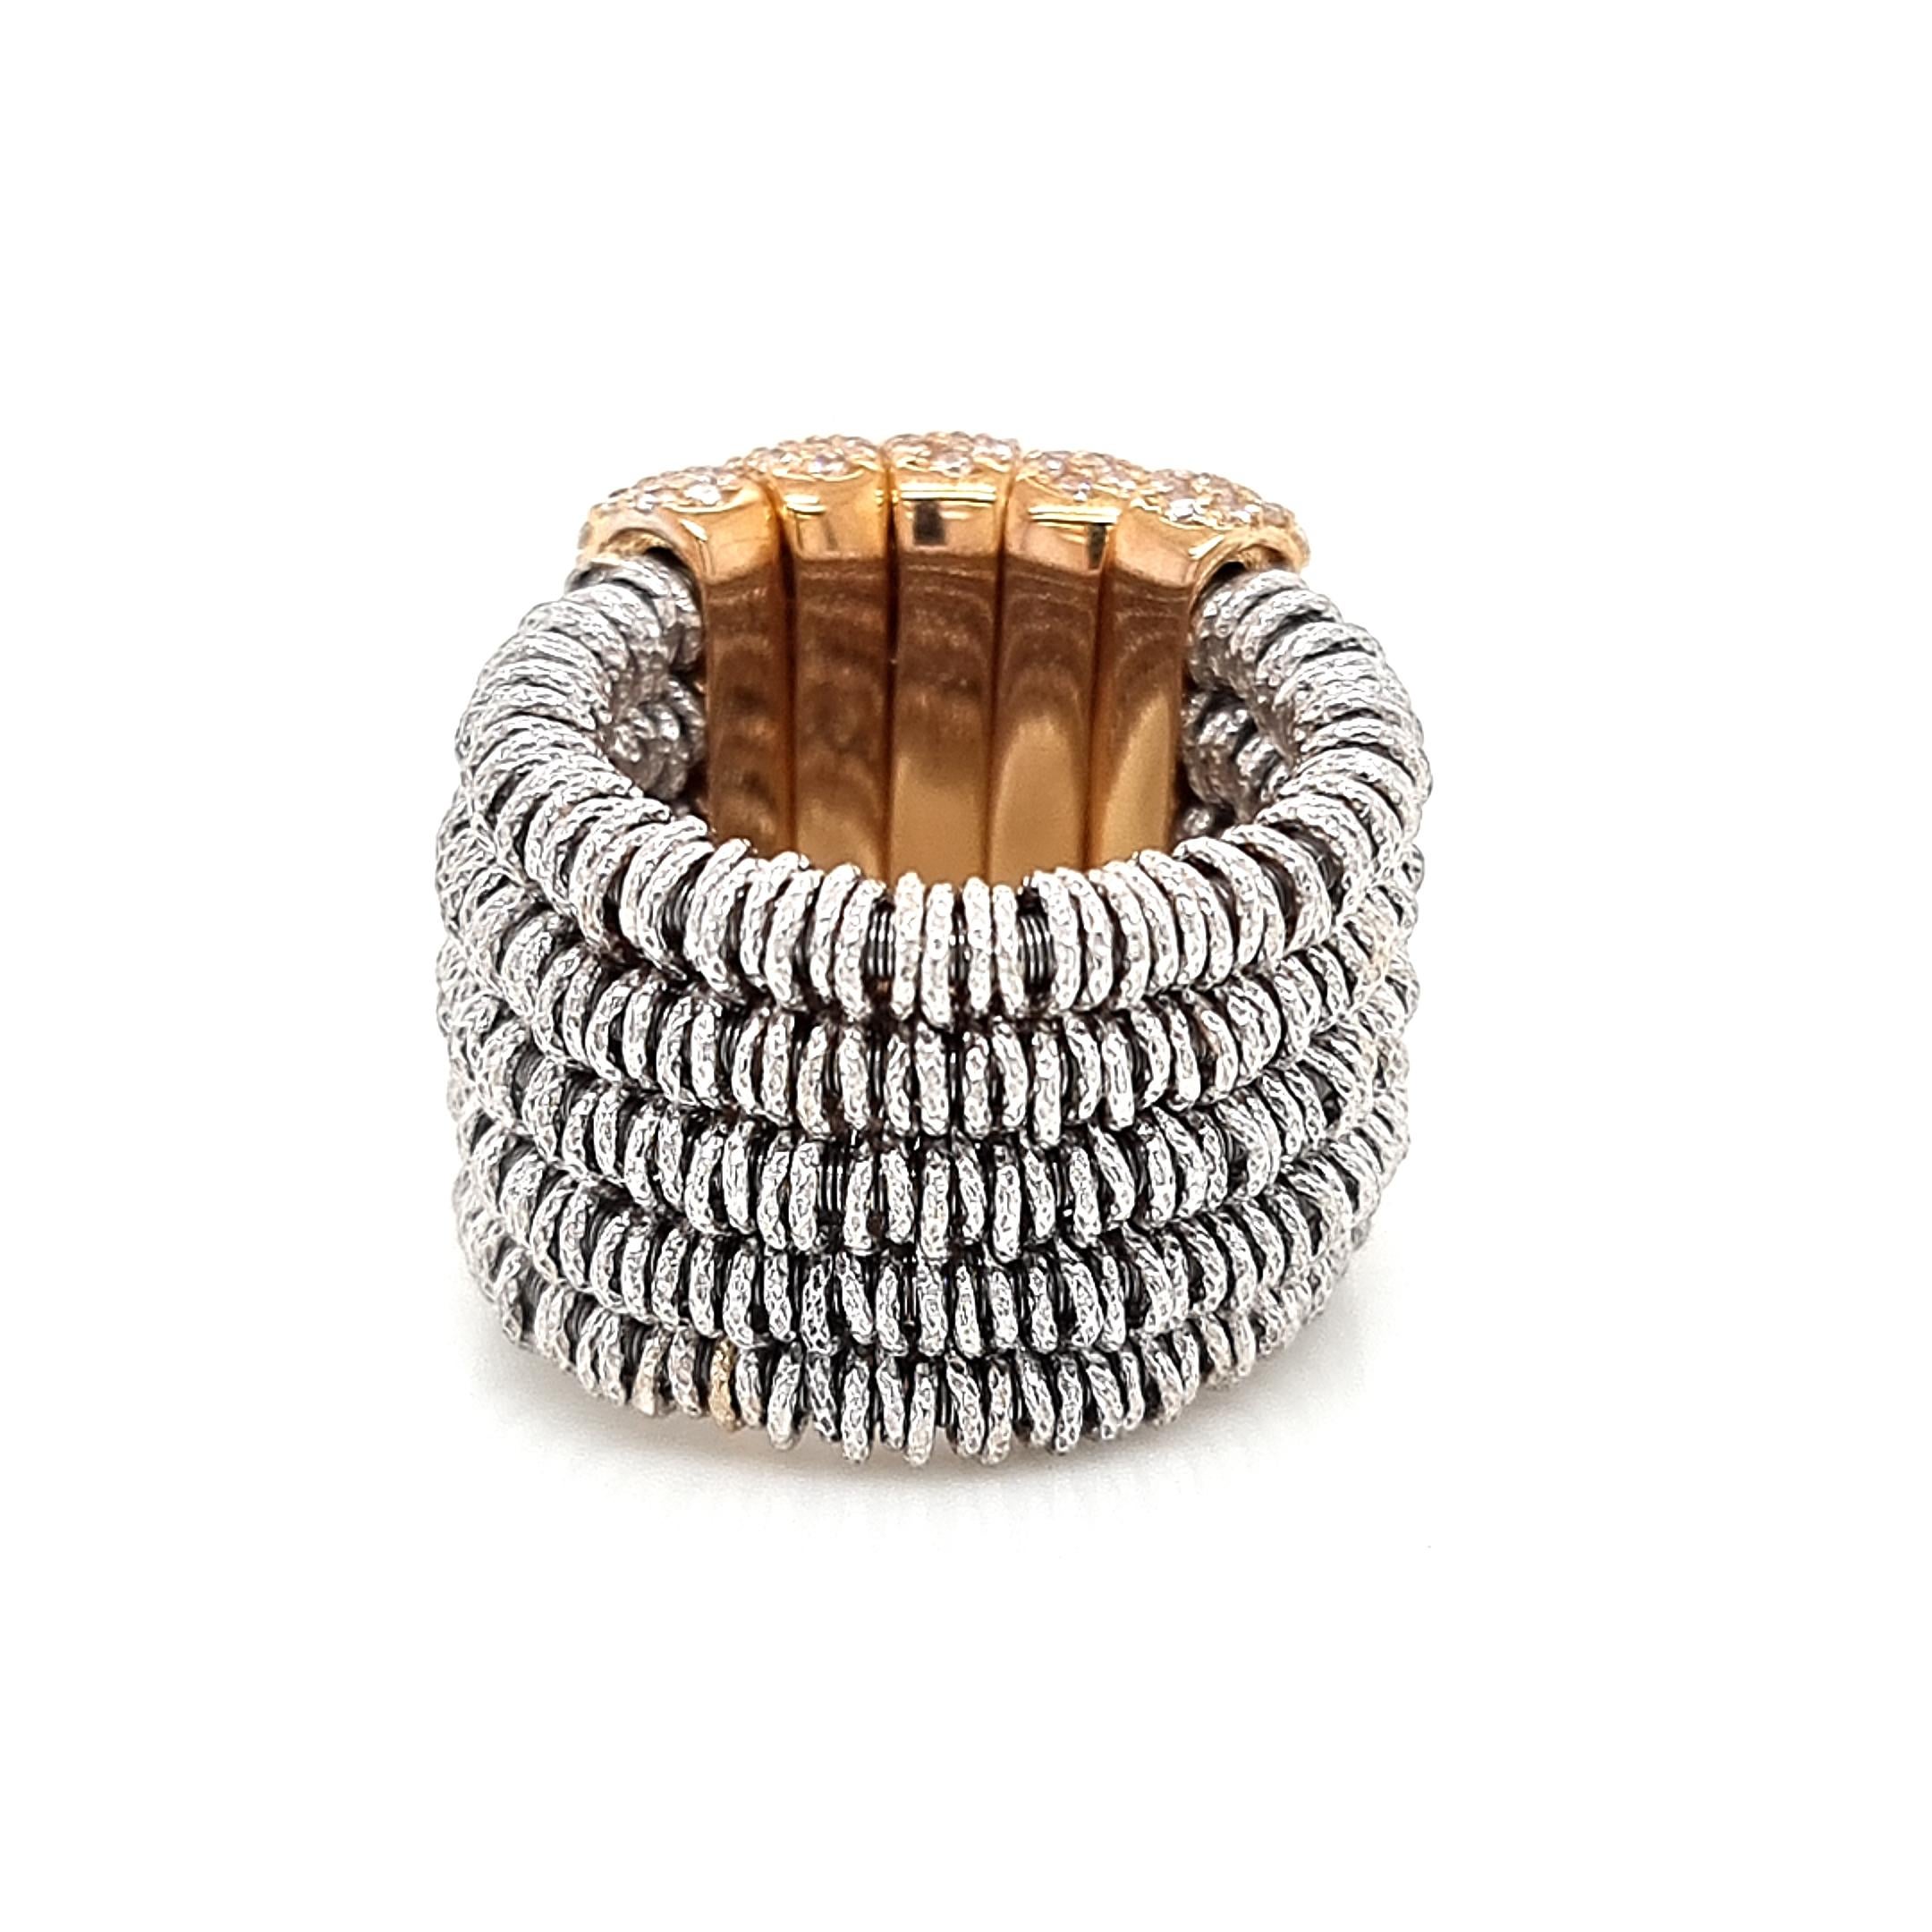 Round Cut Steel Ring with 18k Gold Elements Encrusted with Diamonds by Roberto Demeglio For Sale